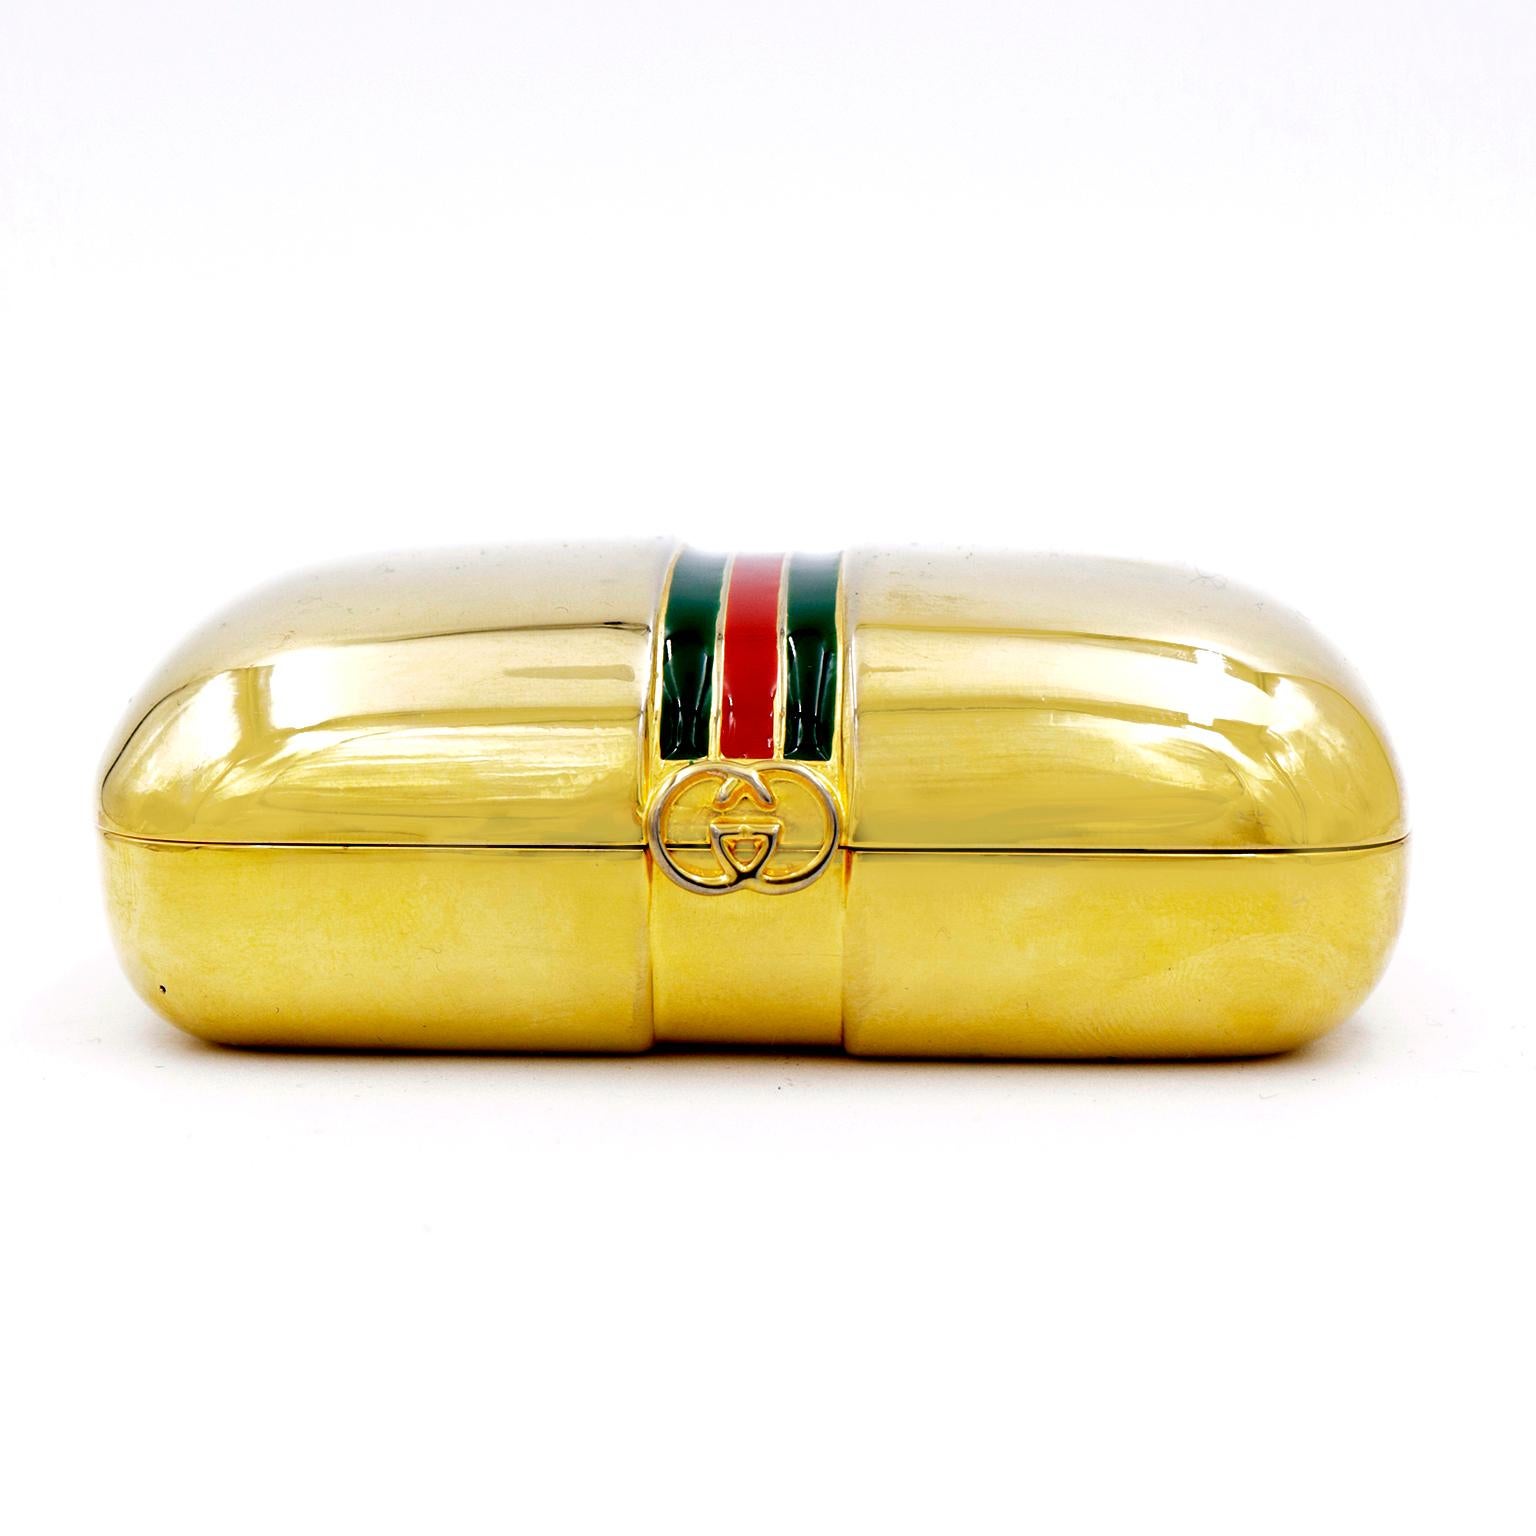 Vintage Gucci Gold Plated Trinket Case With Red & Green Stripe In Excellent Condition For Sale In Portland, OR